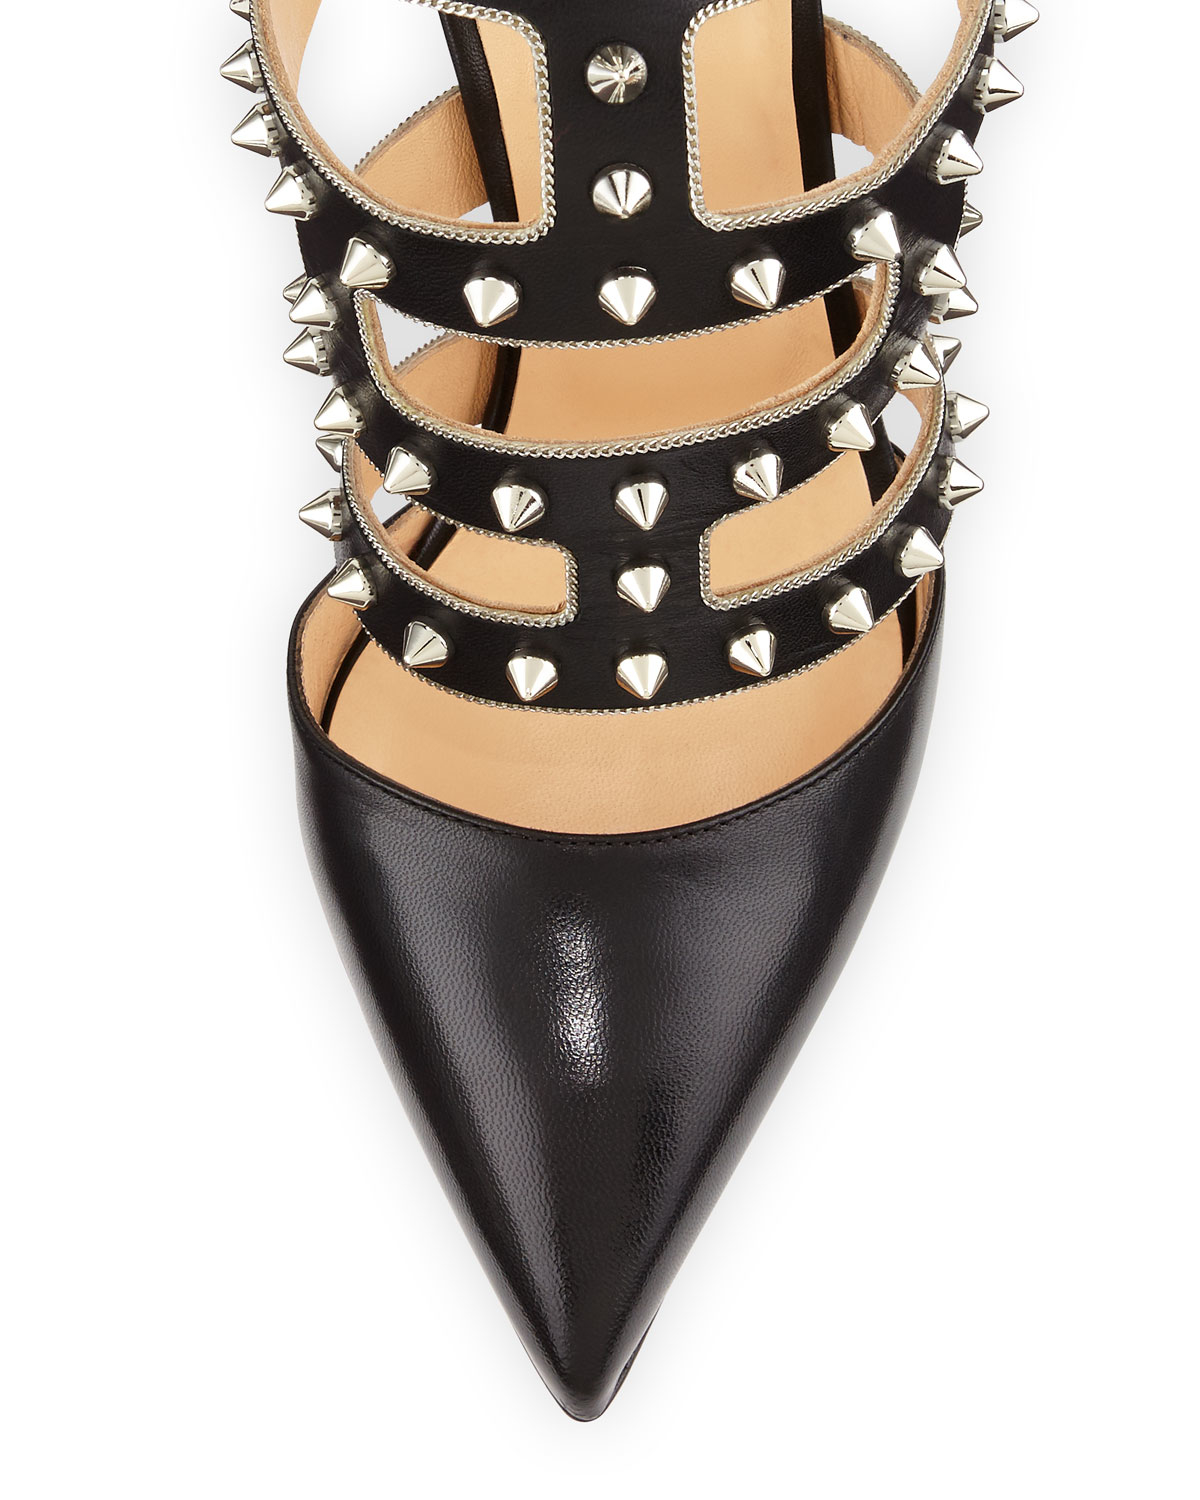 Christian louboutin Tchikaboum Studded Red Sole Pump in Silver ...